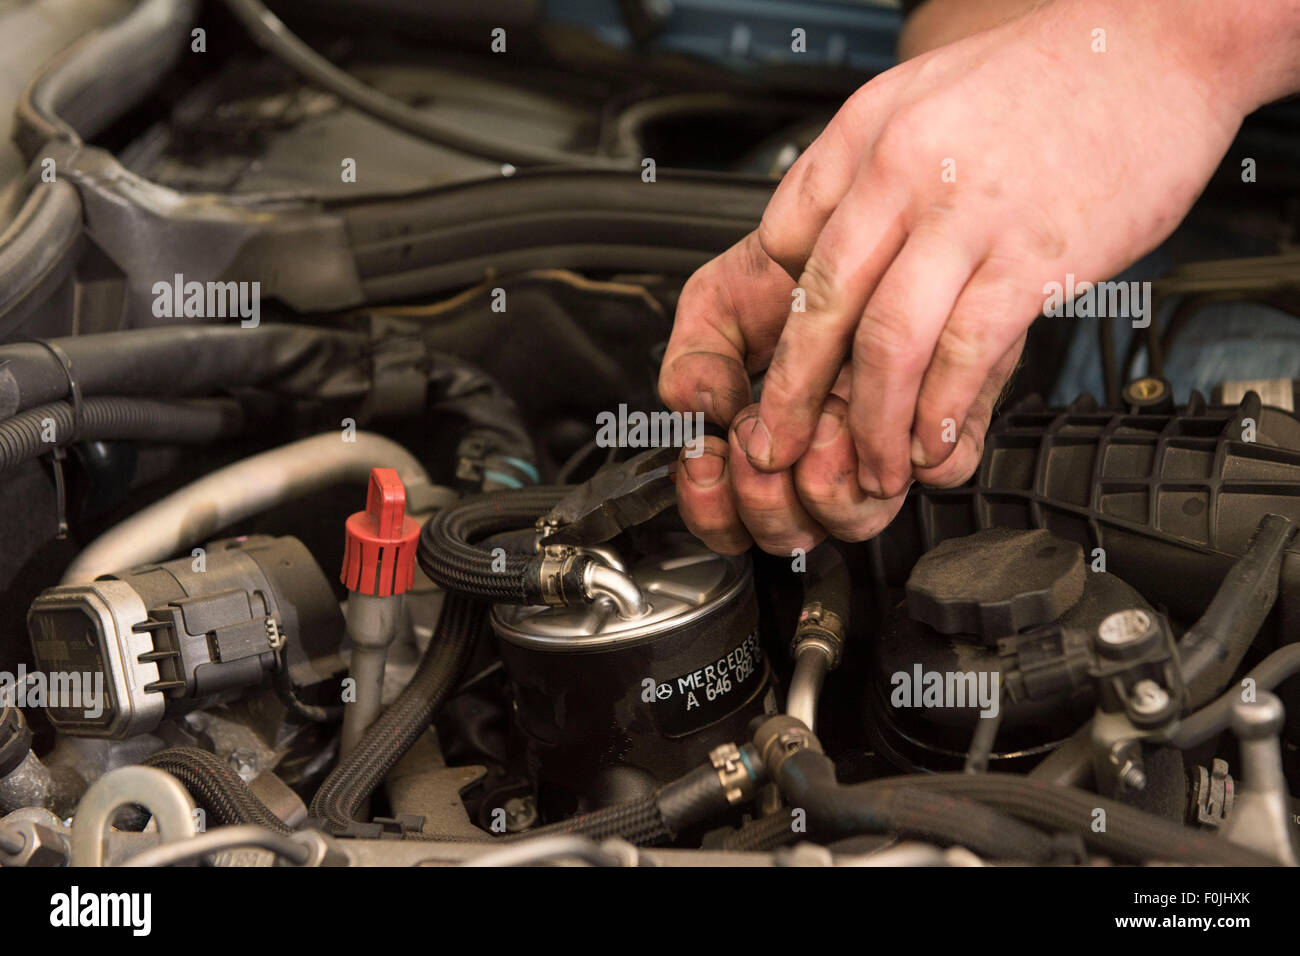 A car mechanic performing routine maintenance replacing an oil filter on a car in a car garage during an MOT. Stock Photo